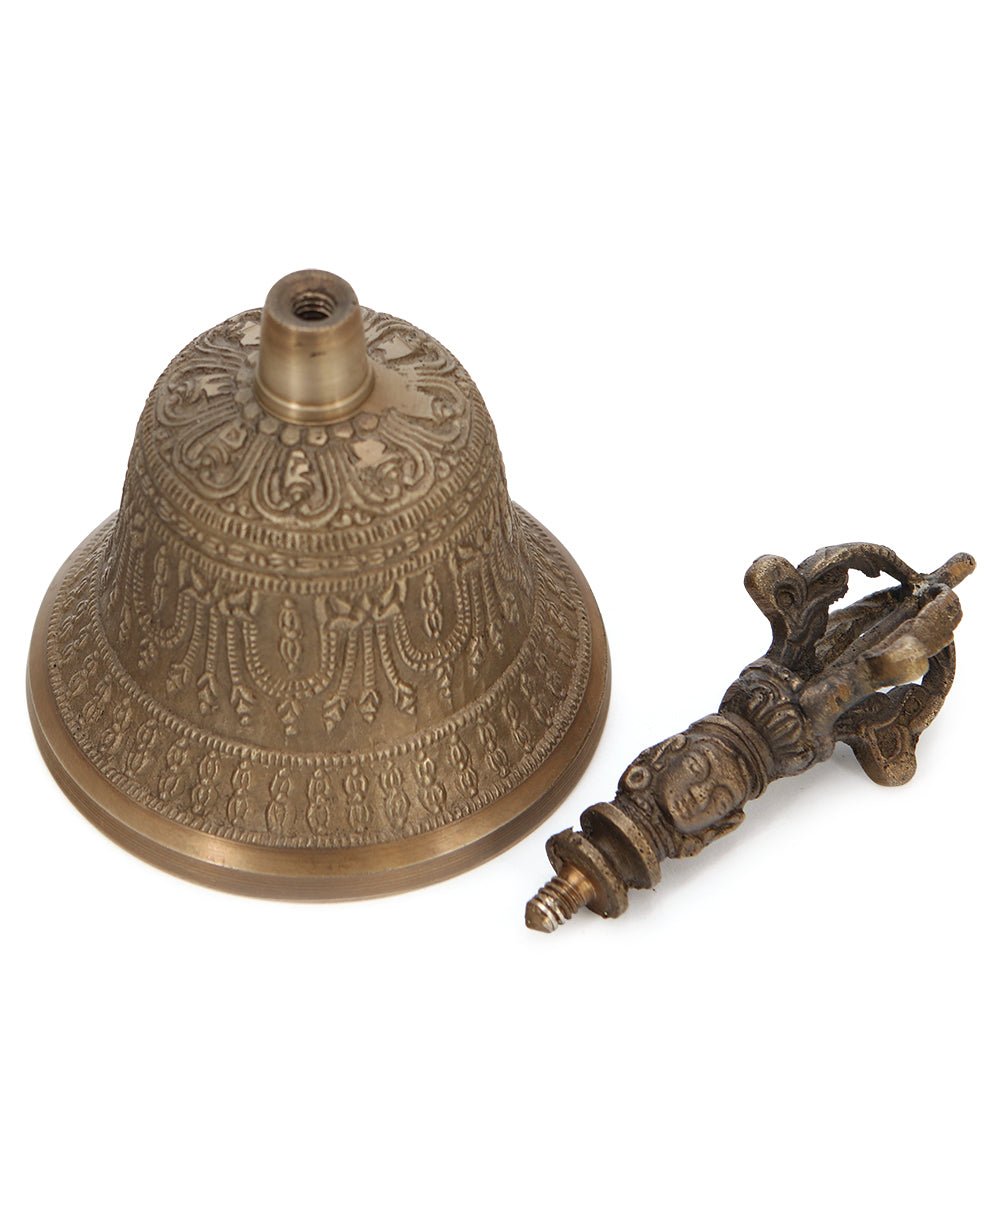 Hand-Held Bell For Meditation and Ceremony - Hand Bells & Chimes